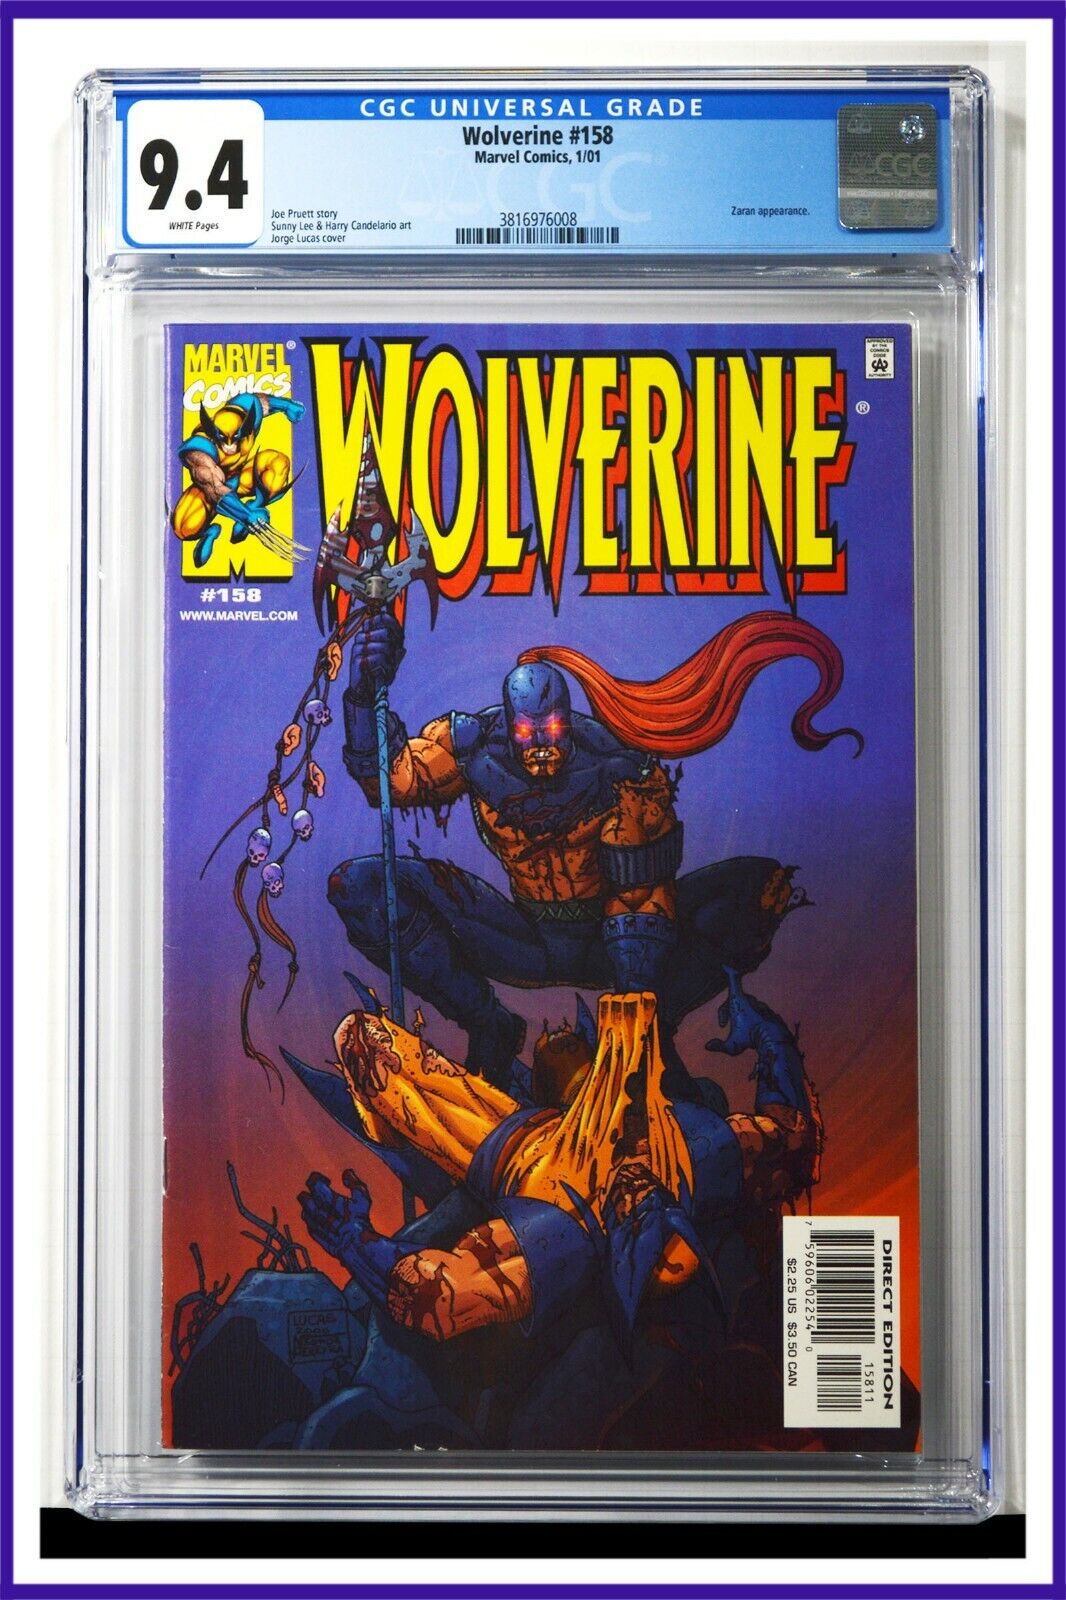 Wolverine #158 CGC Graded 9.4 Marvel January 2001 White Pages Comic Book.